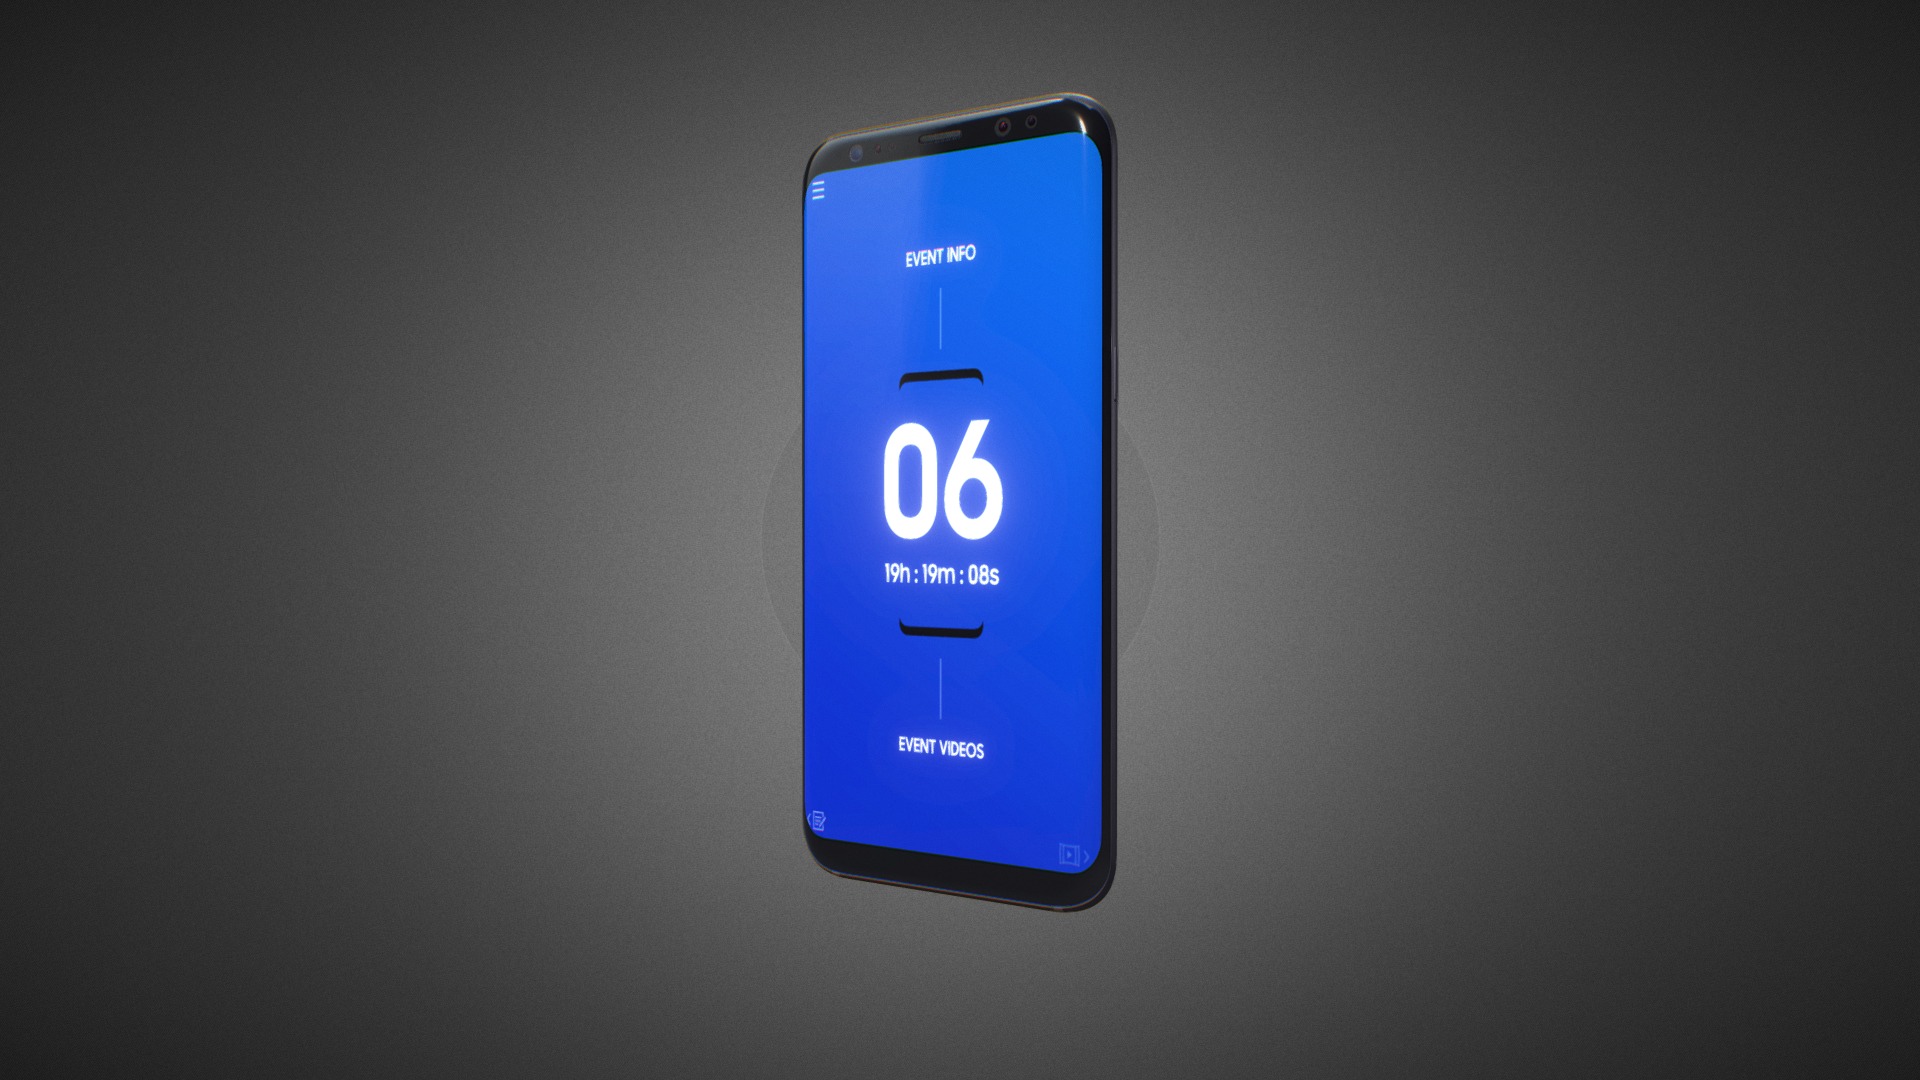 3D model Samsung Galaxy S8 for Element 3D - This is a 3D model of the Samsung Galaxy S8 for Element 3D. The 3D model is about a blue cell phone.